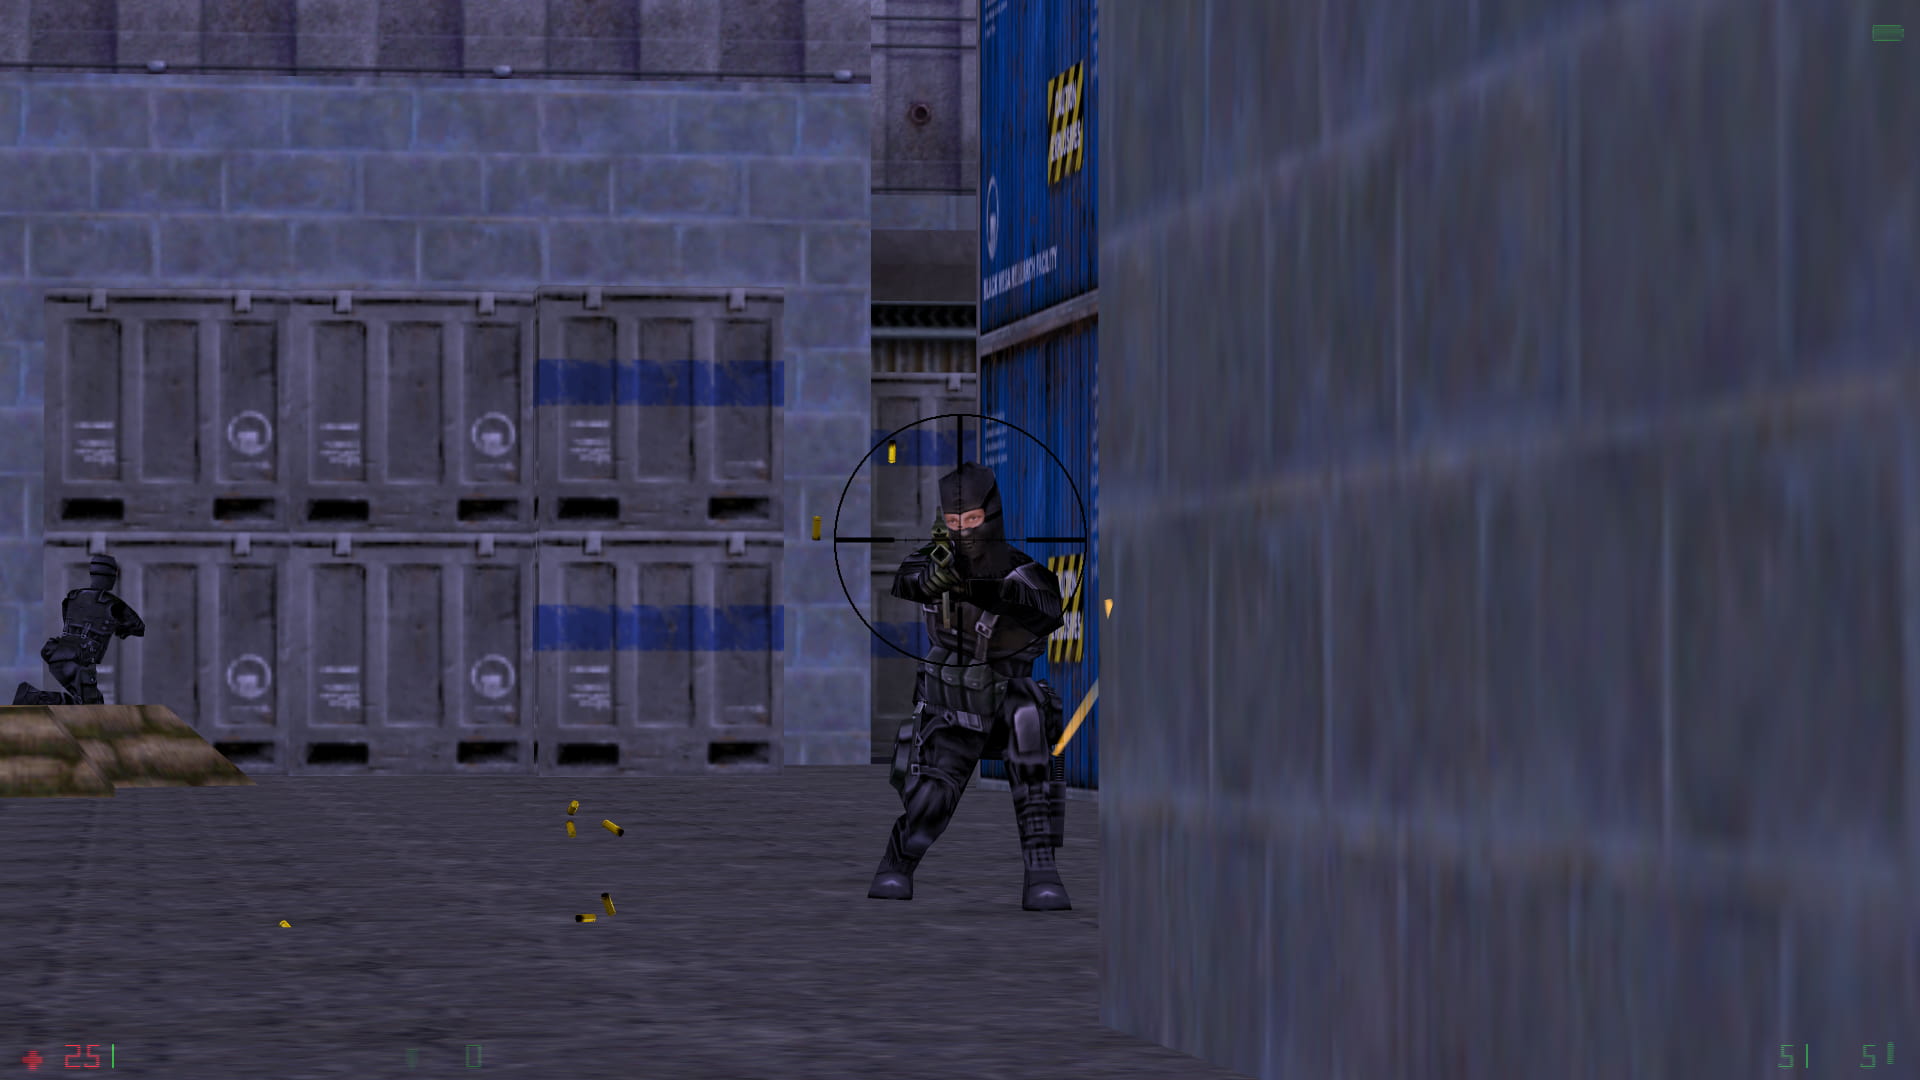 A screenshot of Half-Life: Opposing Force. The player aims through the scope of their sniper rifle at the head of an enemy Black Ops soldier.